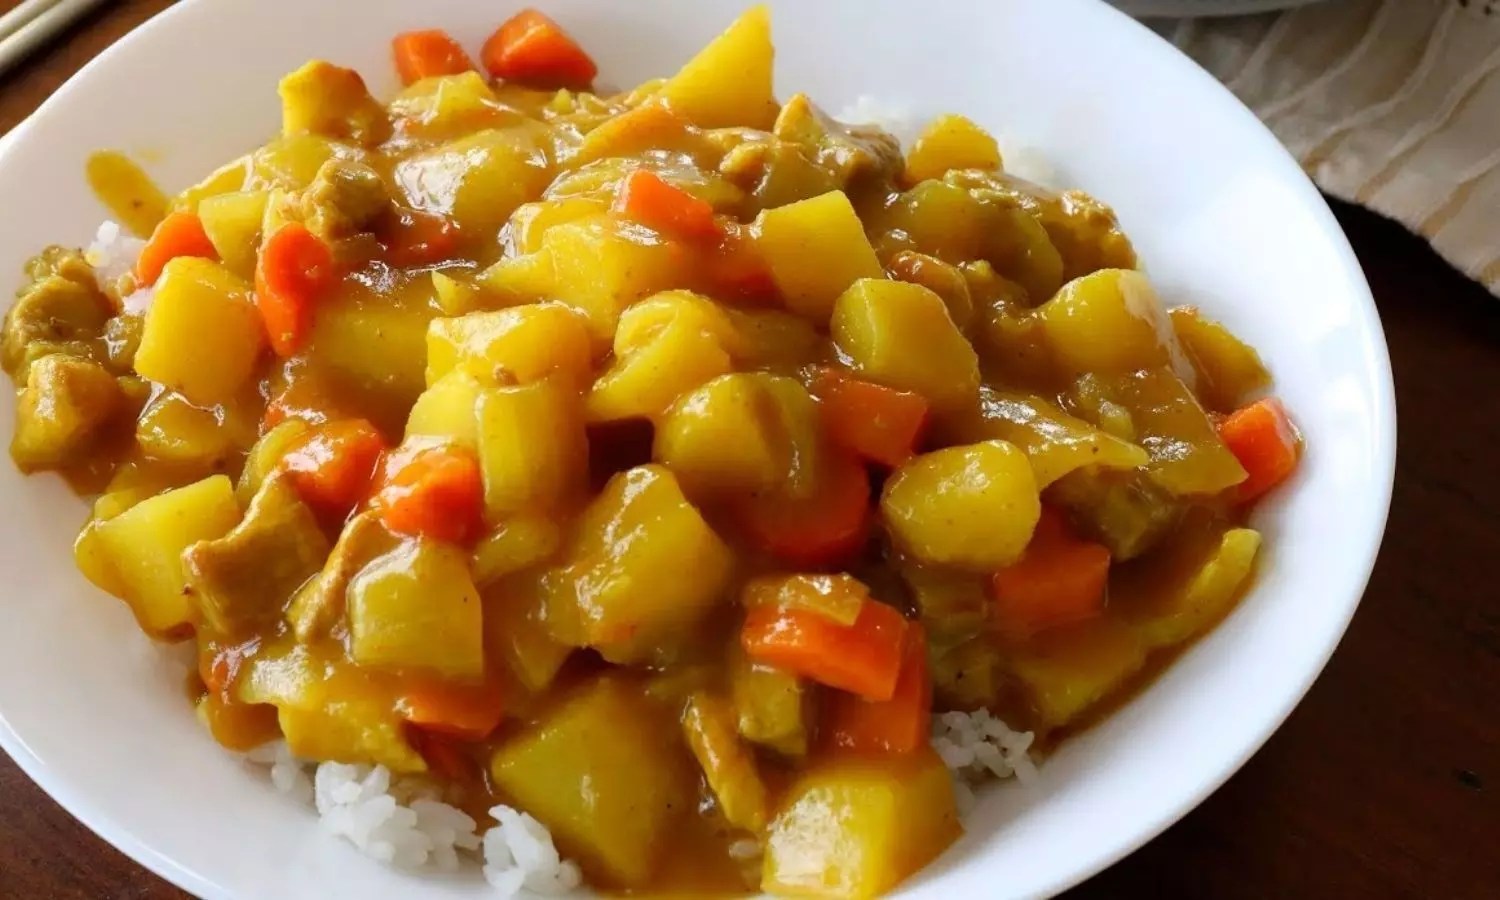 Curry-rice consumption tied to lower risk of hypertension, diabetes, and depression: Study